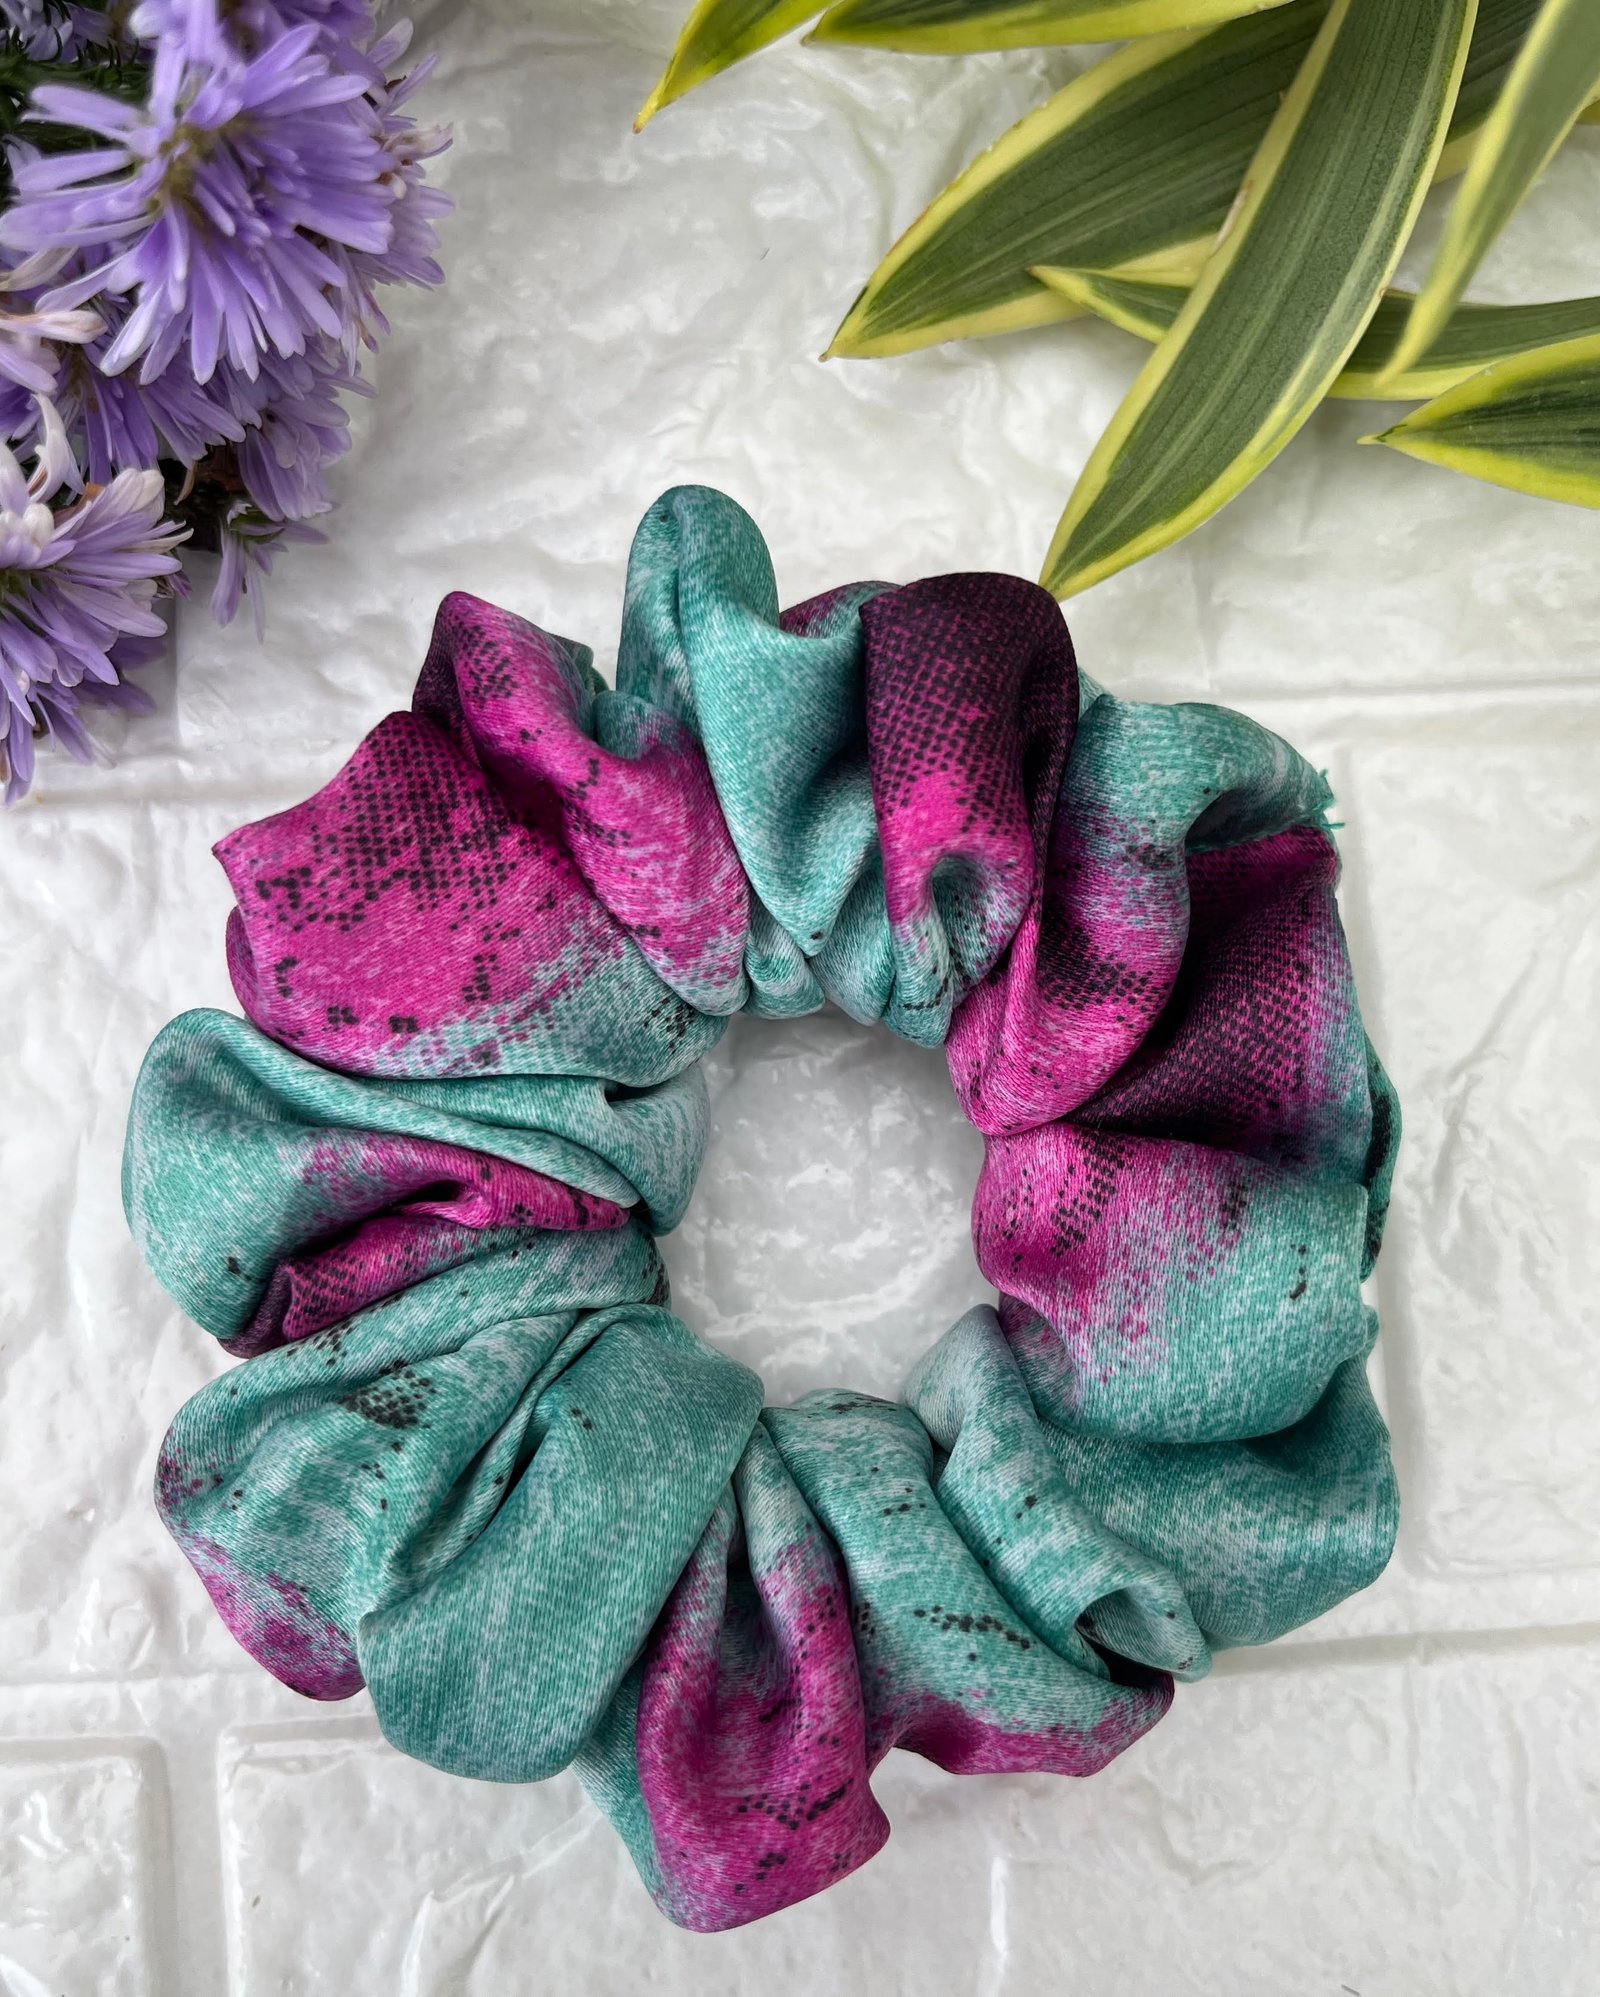 Refreshing P-teal scrunchies with vibrant teal tones, perfect for a chic and trendy look, ideal for summer fashion with an aquatic flair.